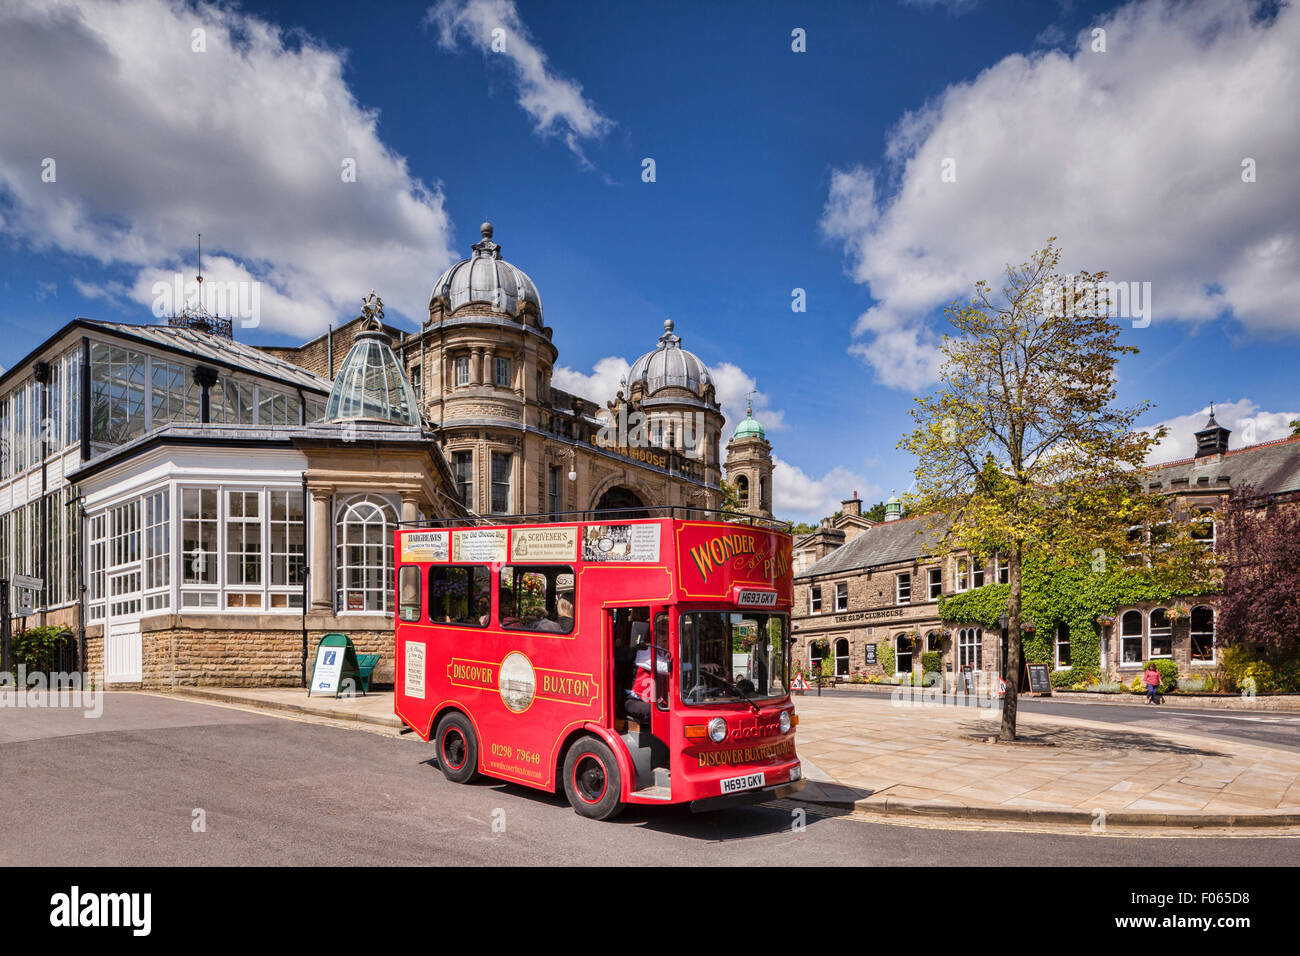 Sightseeing 'tram' departing from Buxton Opera House, Buxton, Derbyshire, England Stock Photo